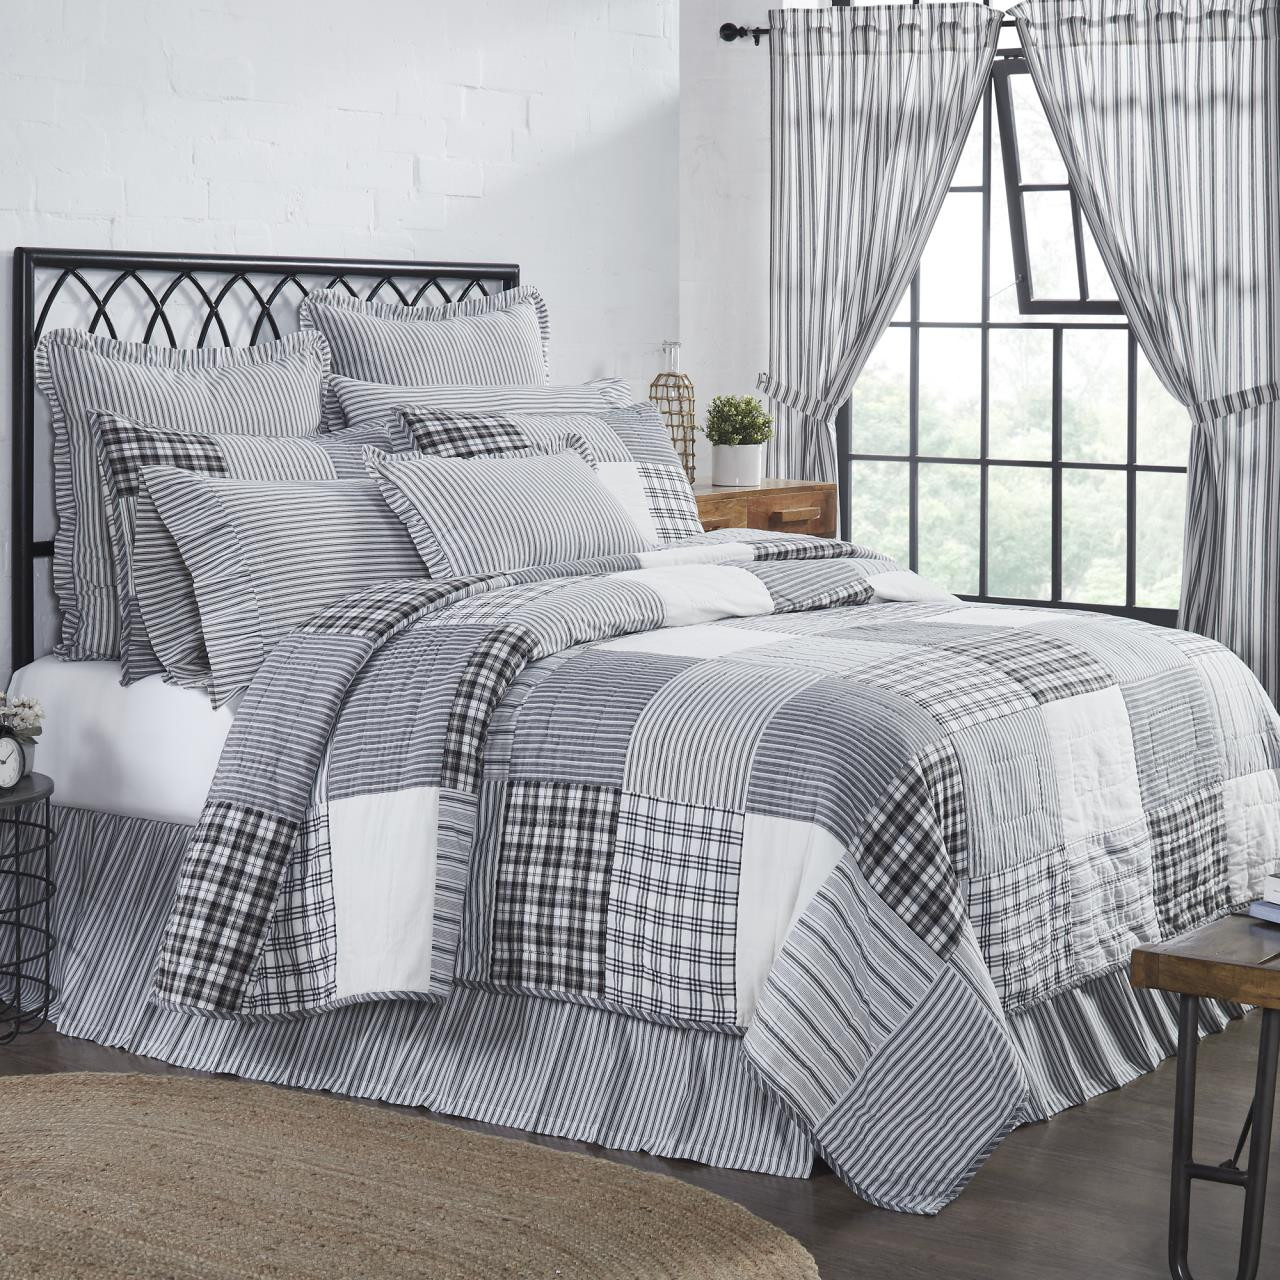 https://cdn10.bigcommerce.com/s-9ese1/products/22698/images/143050/Sawyer-Mill-Black-Farmhouse-Patchwork-Bedding-Collection-ColSawyerMillBlackVHC_image1__91028.1687450643.1280.1280.jpg?c=2